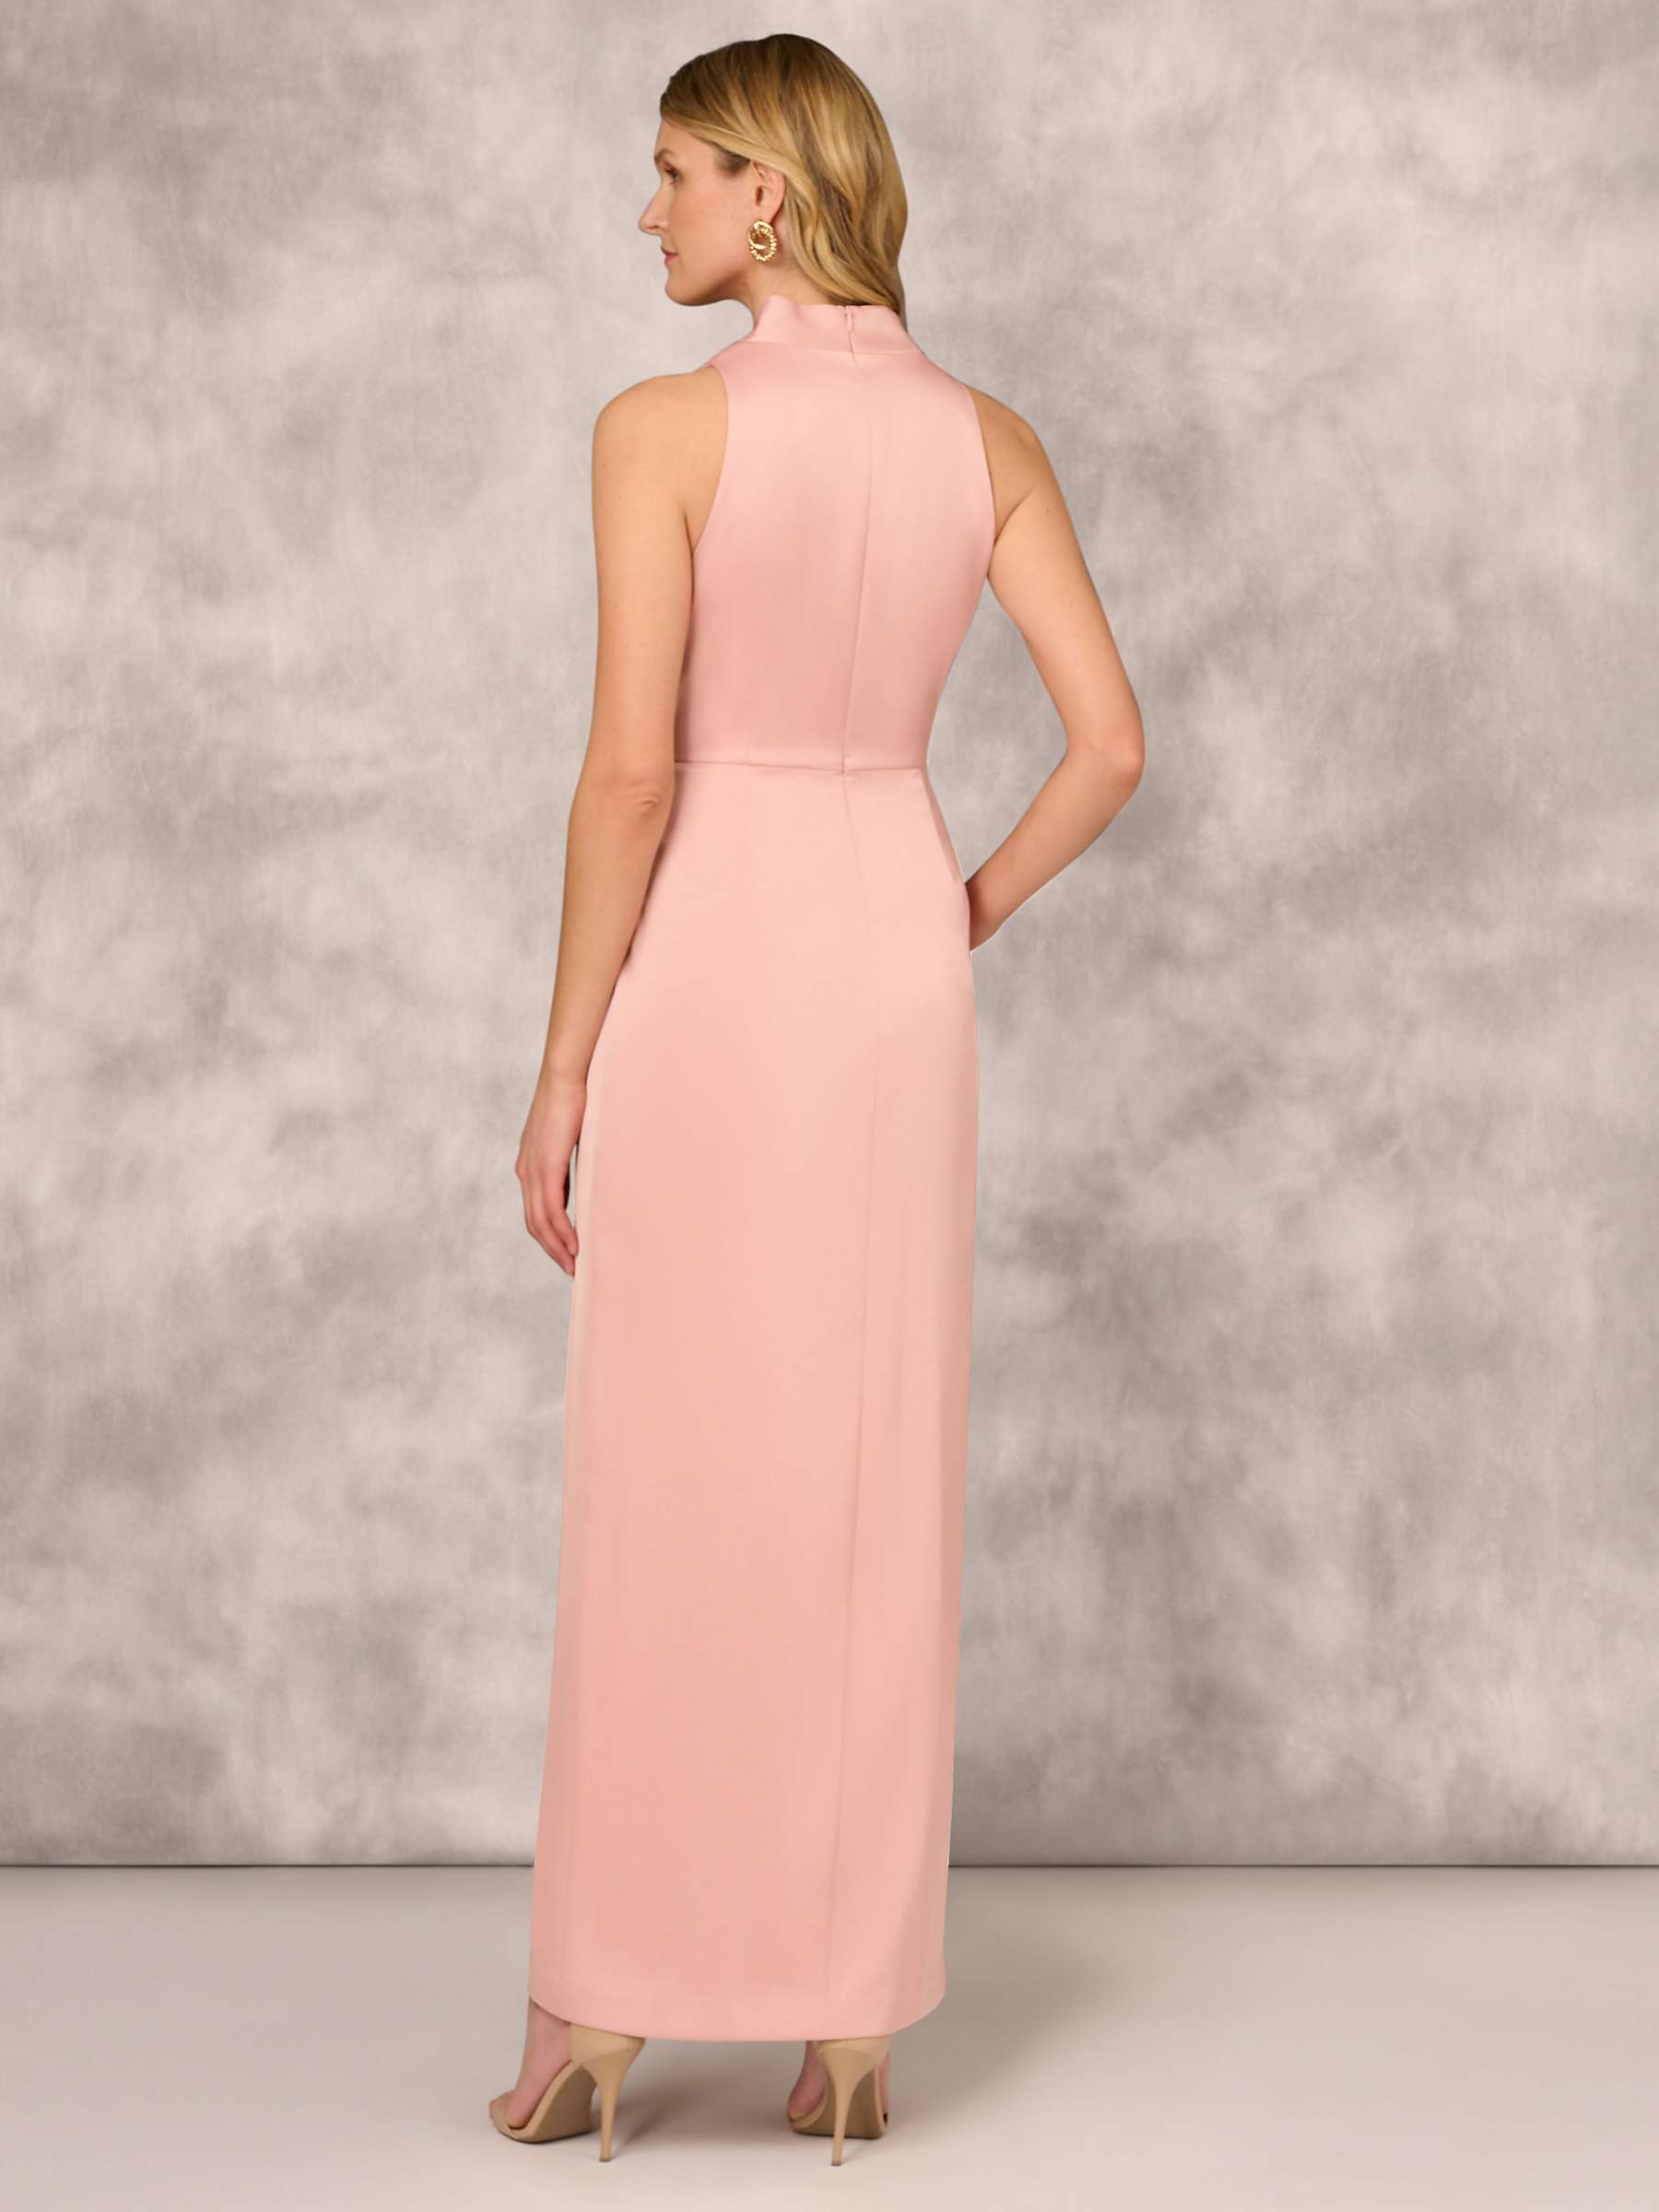 Buy Aidan Mattox by Adrianna Papell Crepe Back Satin Dress, Champagne Rose Online at johnlewis.com